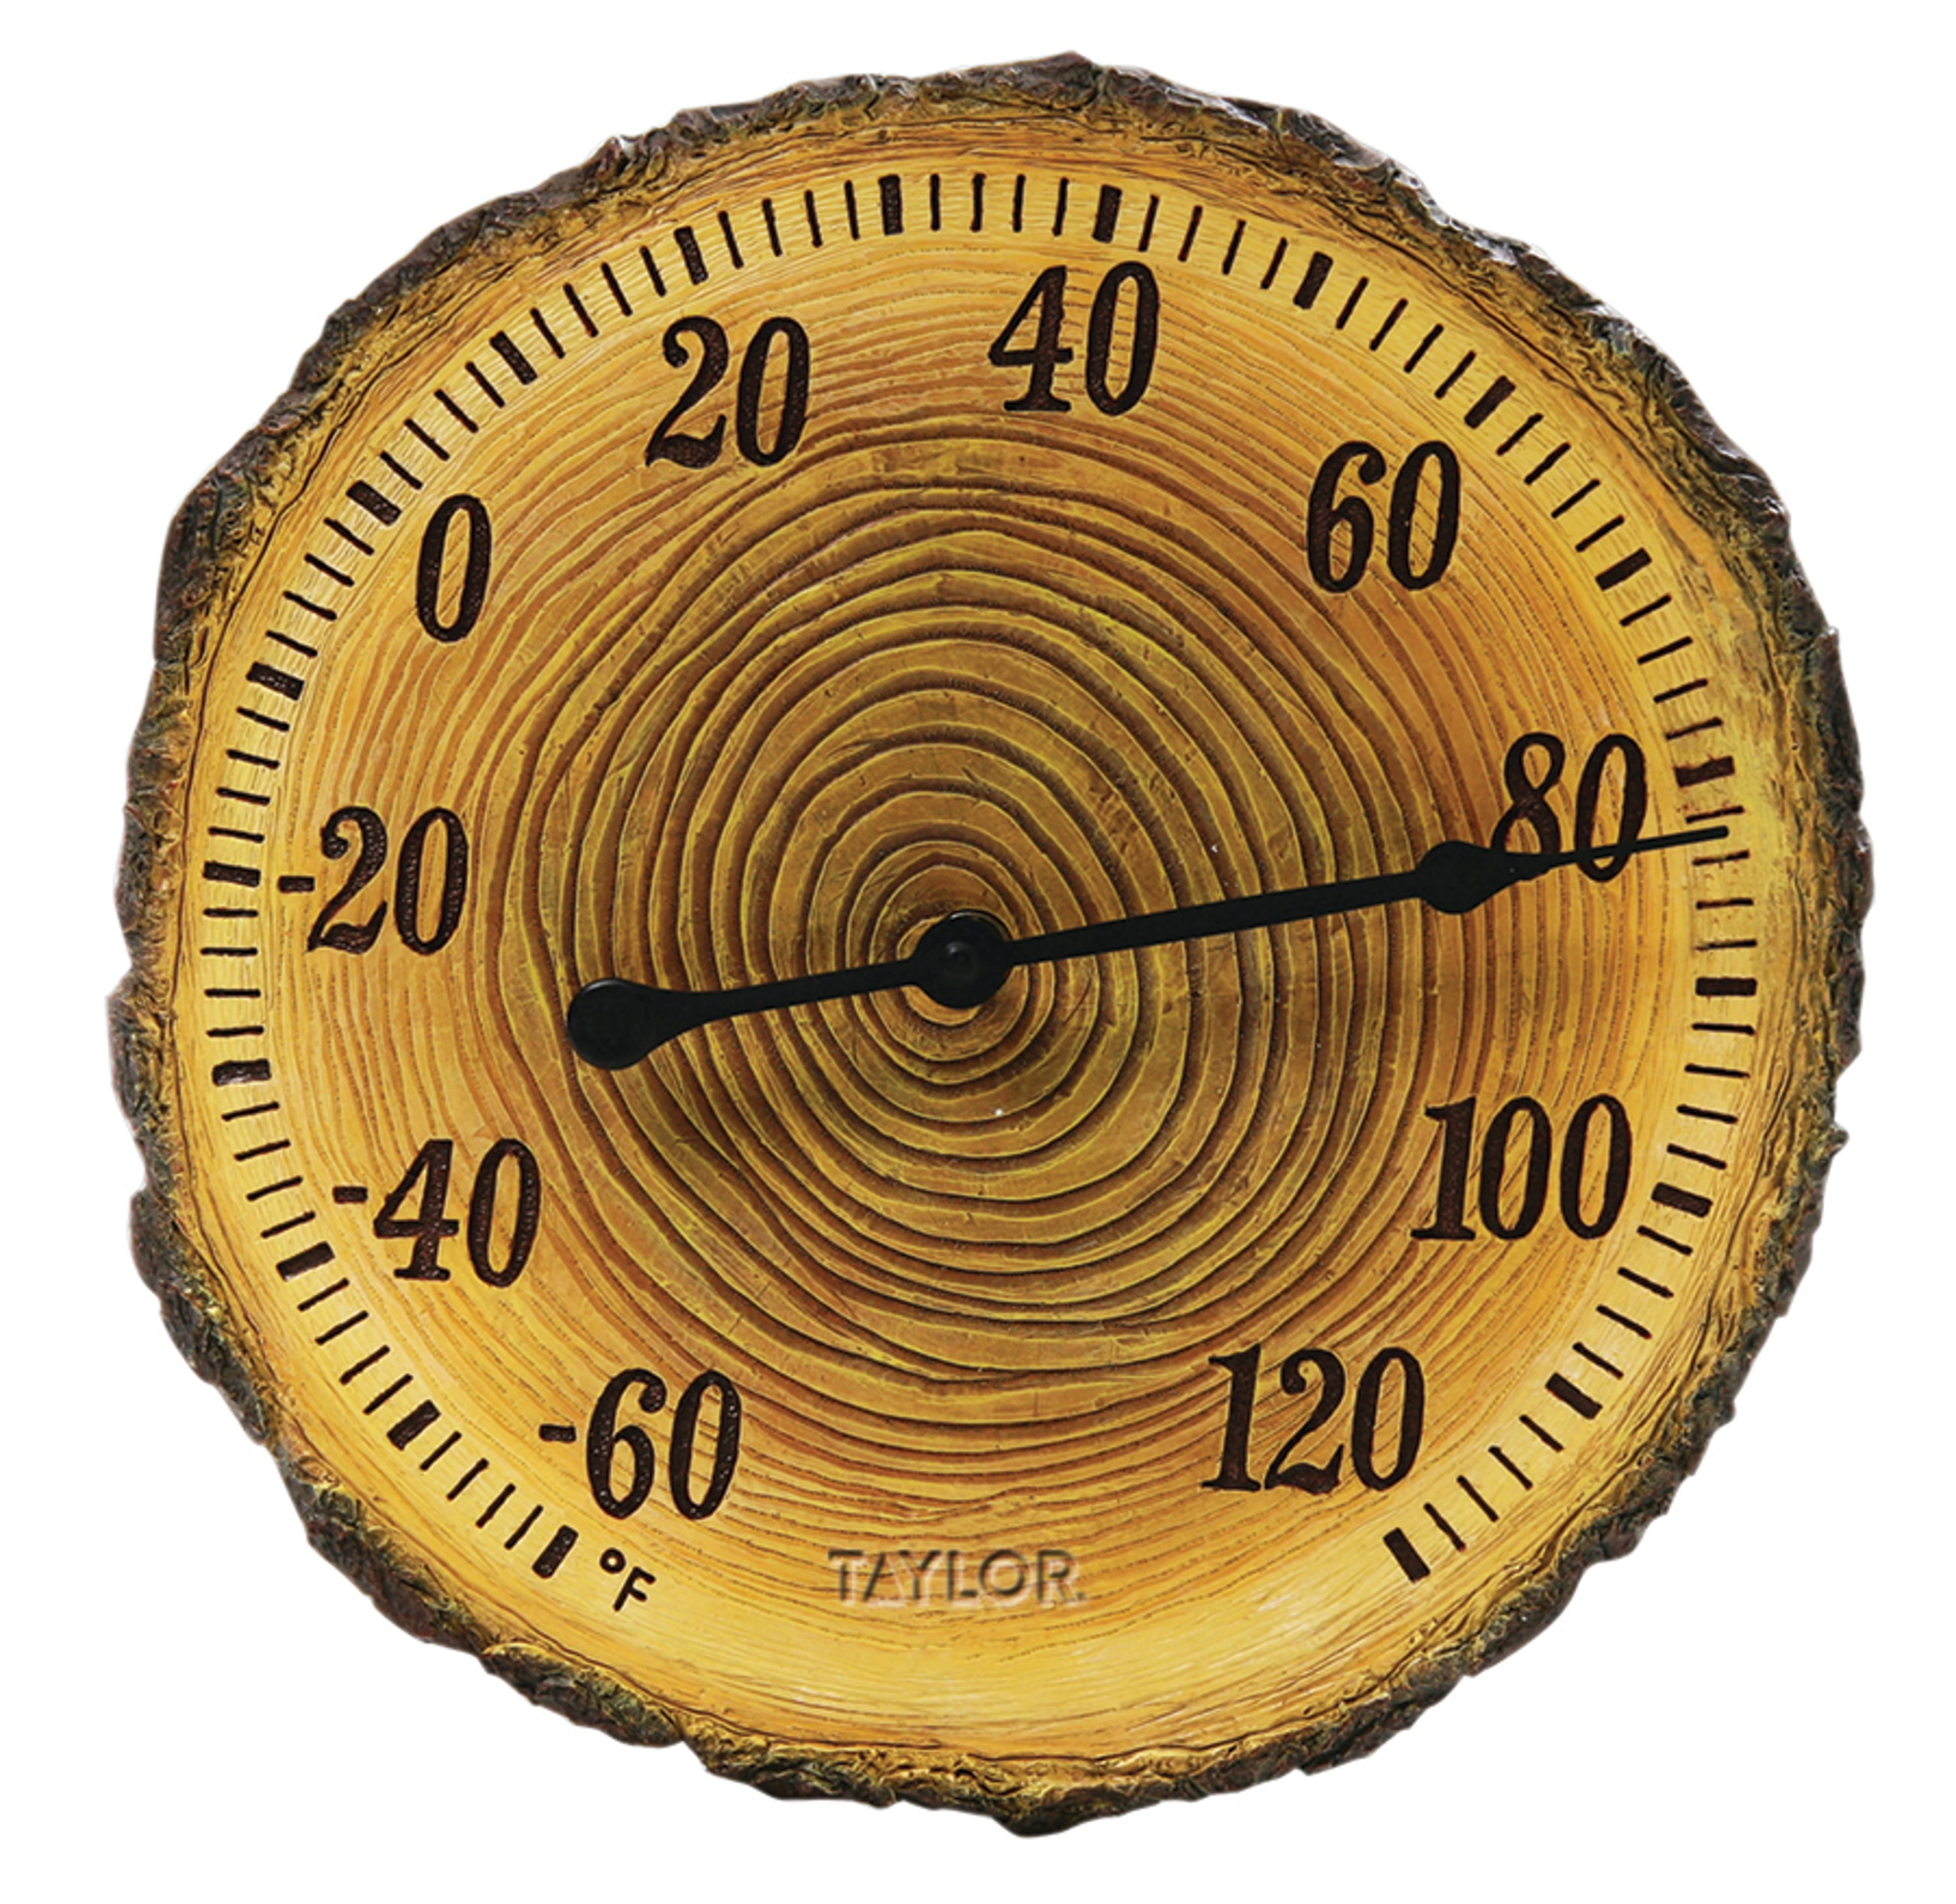 Outdoor Thermometer, Measurement is in Fahrenheit, Rustic Hickory